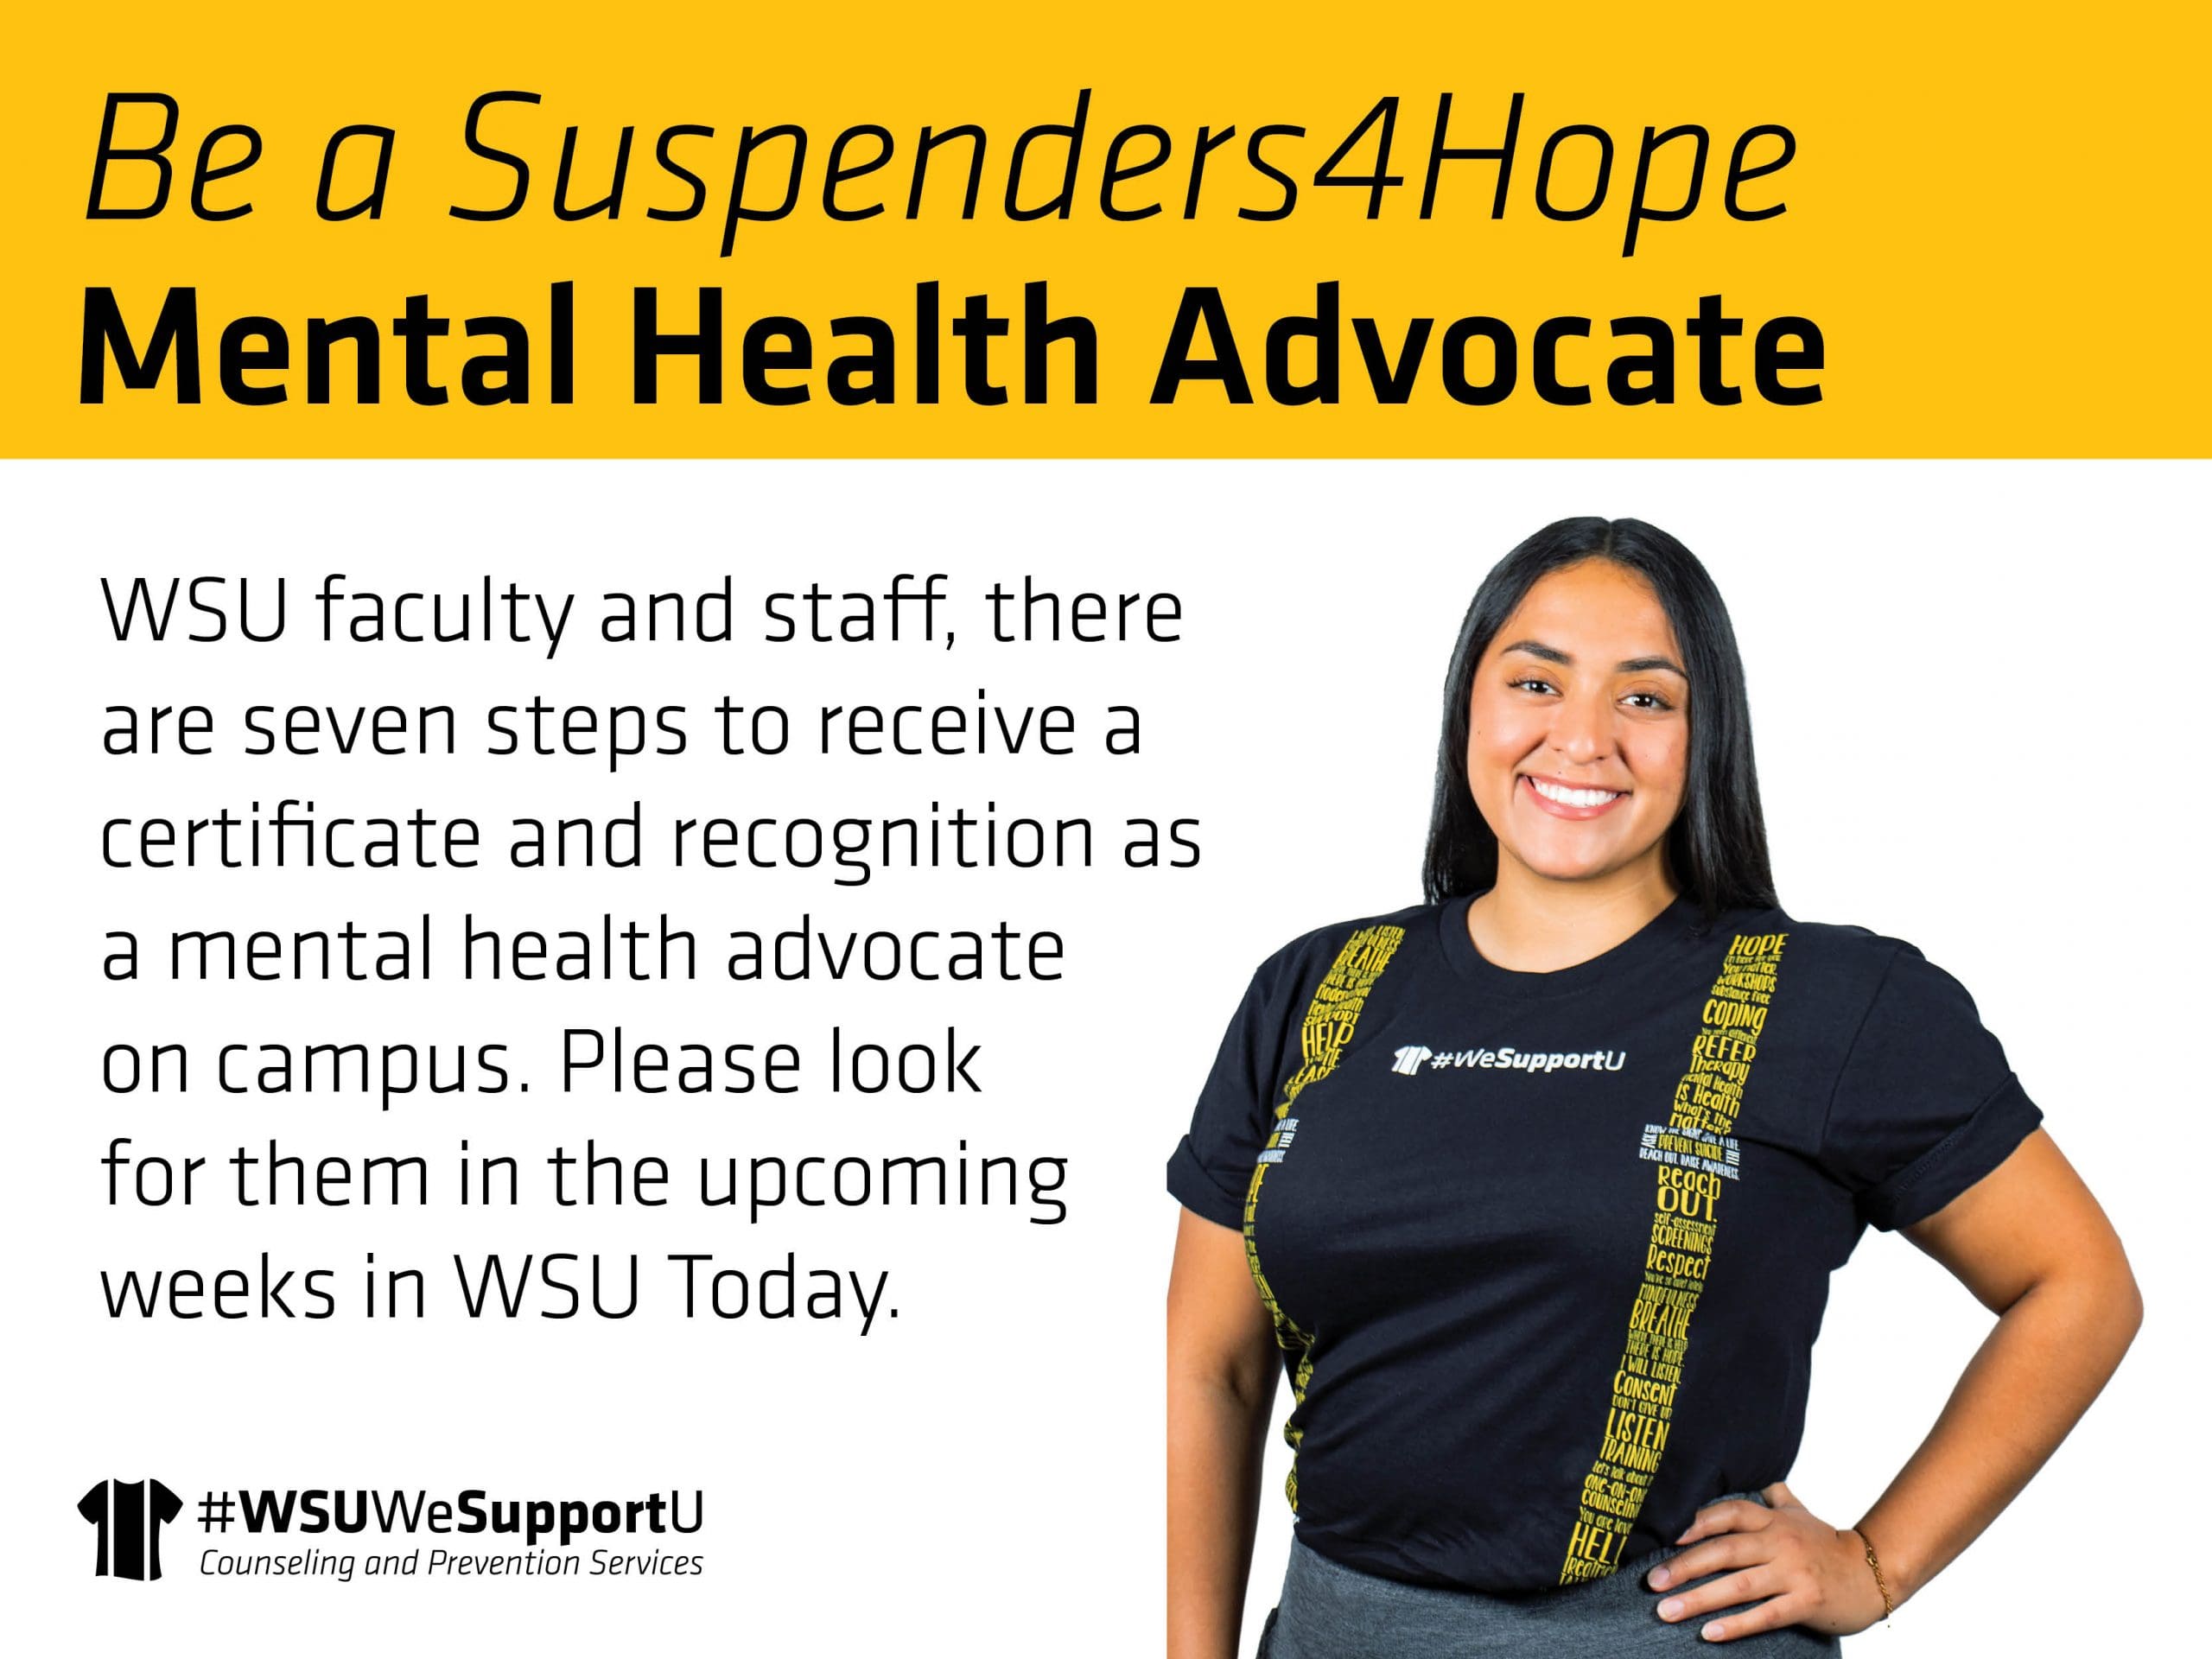 Graphic with a photo of a women in the "Suspenders4Hope" T-shirt and the text, "Be a Suspenders4Hope Mental Health Advocate | WSU faculty and staff, there are seven steps to receive a certificate and recognition as a mental health advocate on campus. Please look for them in the upcoming weeks in WSU Today" and the Counseling and Prevention Services logo.